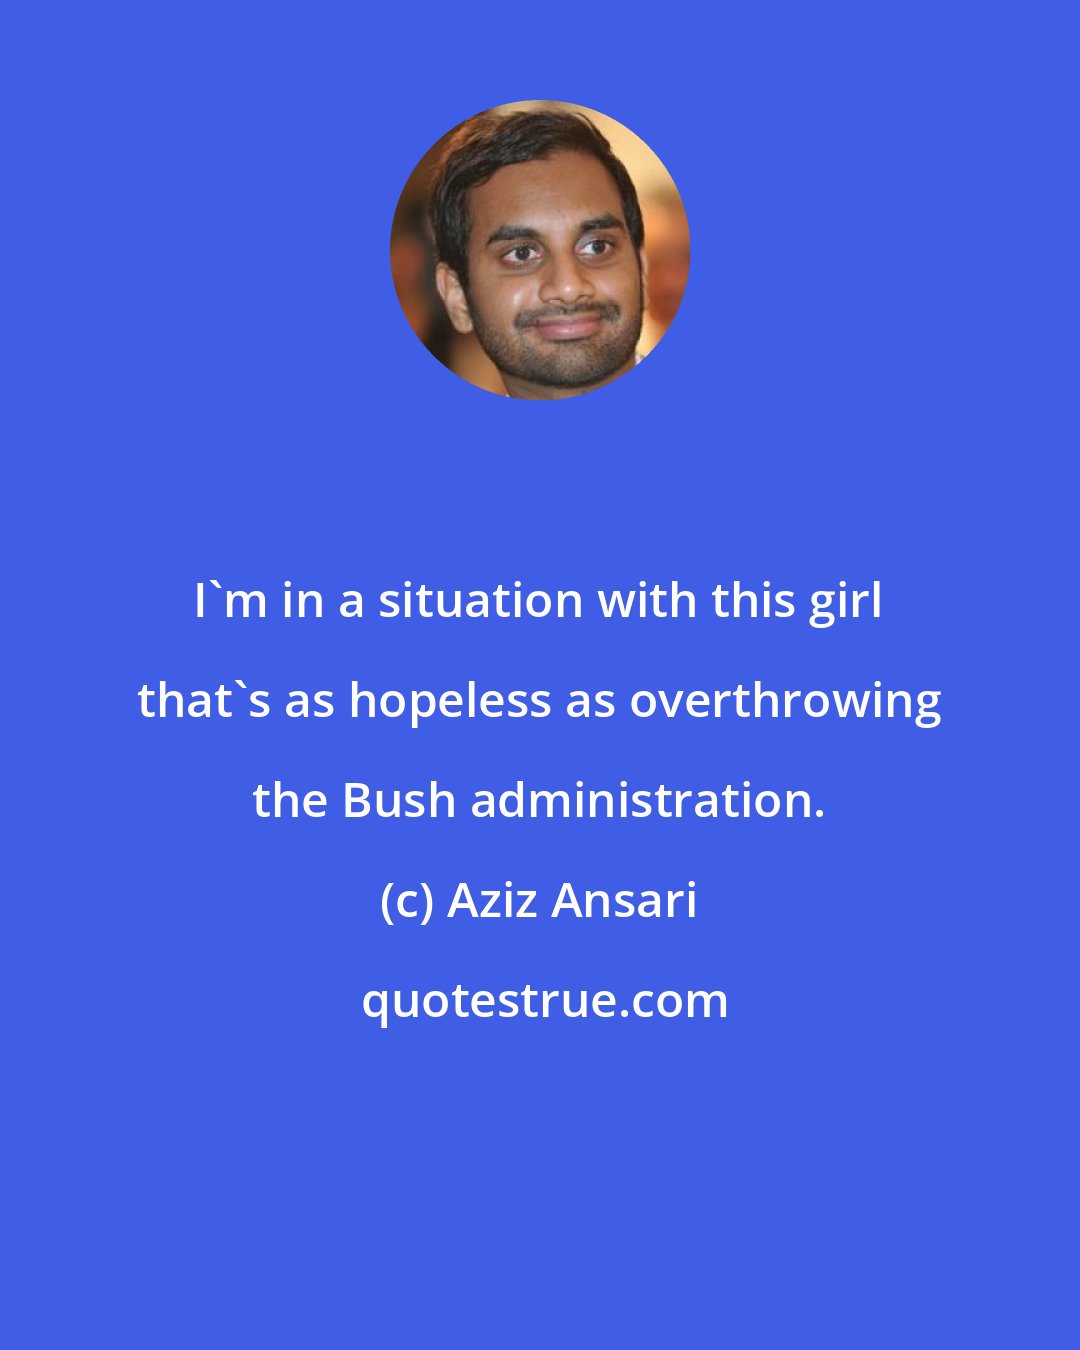 Aziz Ansari: I'm in a situation with this girl that's as hopeless as overthrowing the Bush administration.